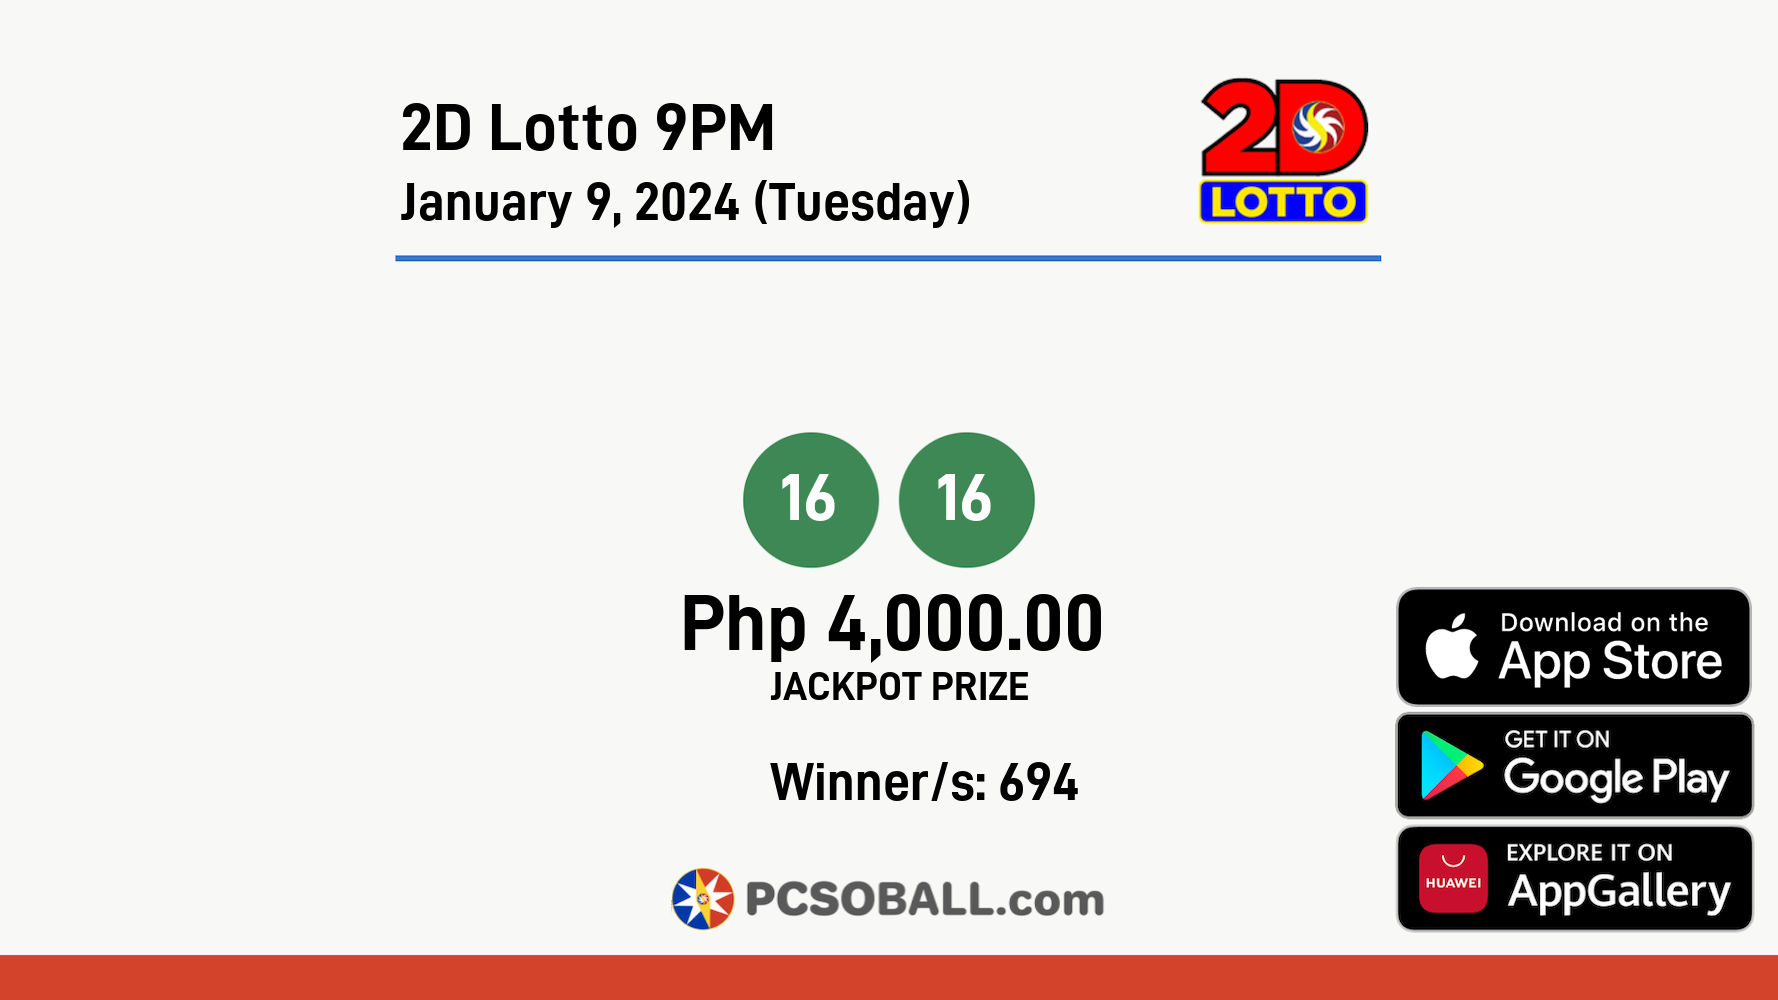 2D Lotto 9PM January 9, 2024 (Tuesday) Result